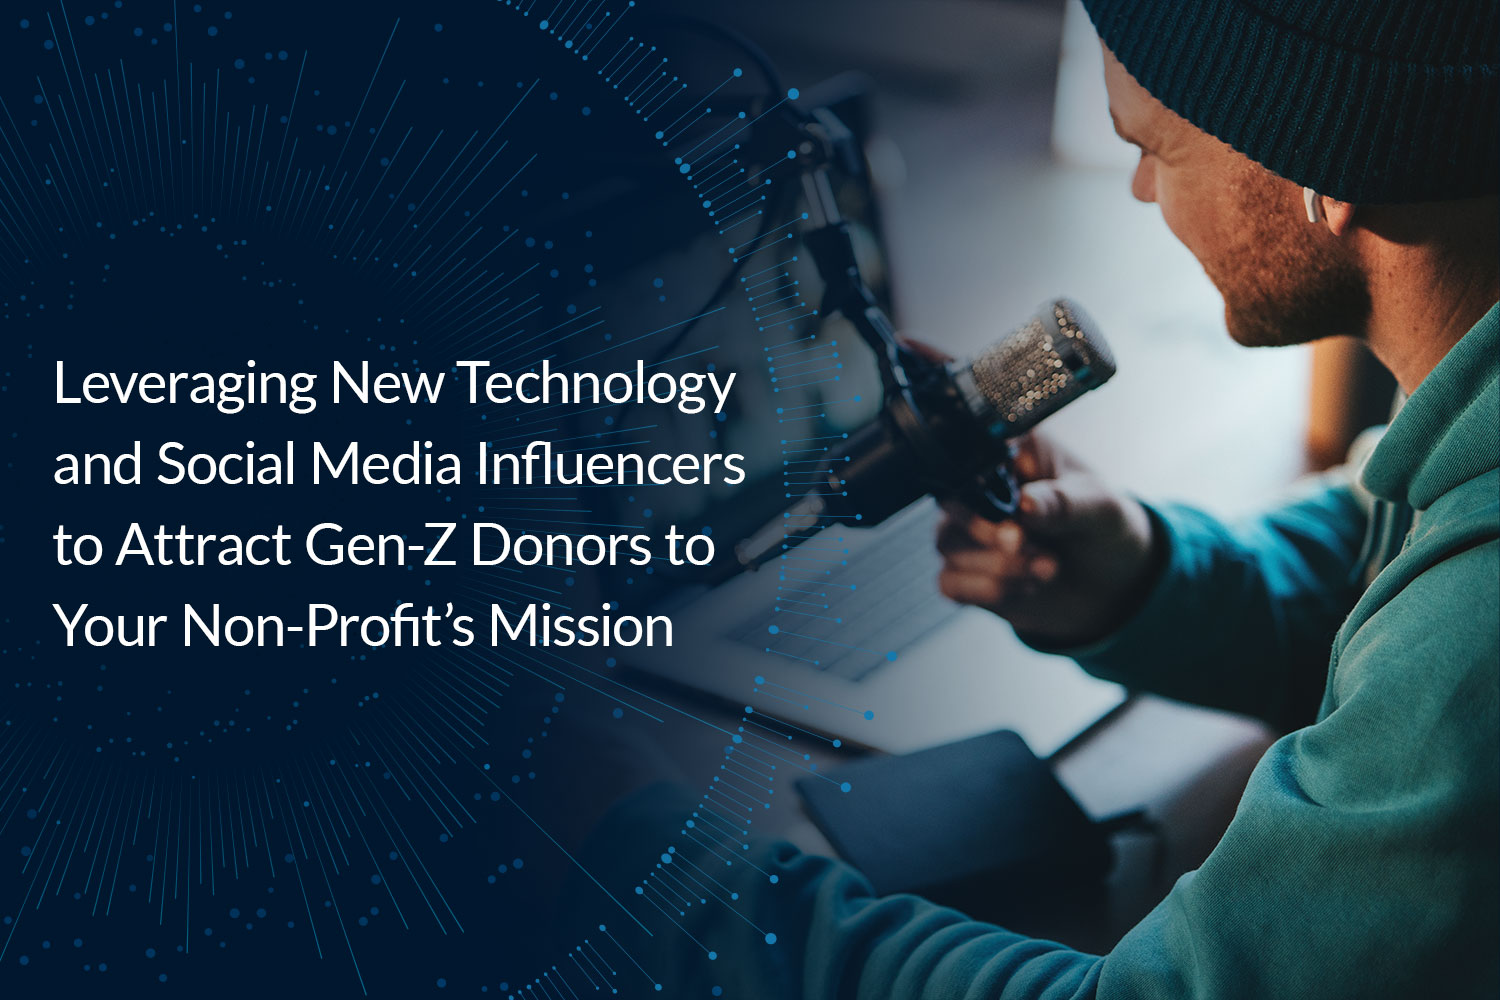 Leveraging New Technology and Social Media Influencers to Attract Gen-Z Donors to Your Nonprofit’s Mission